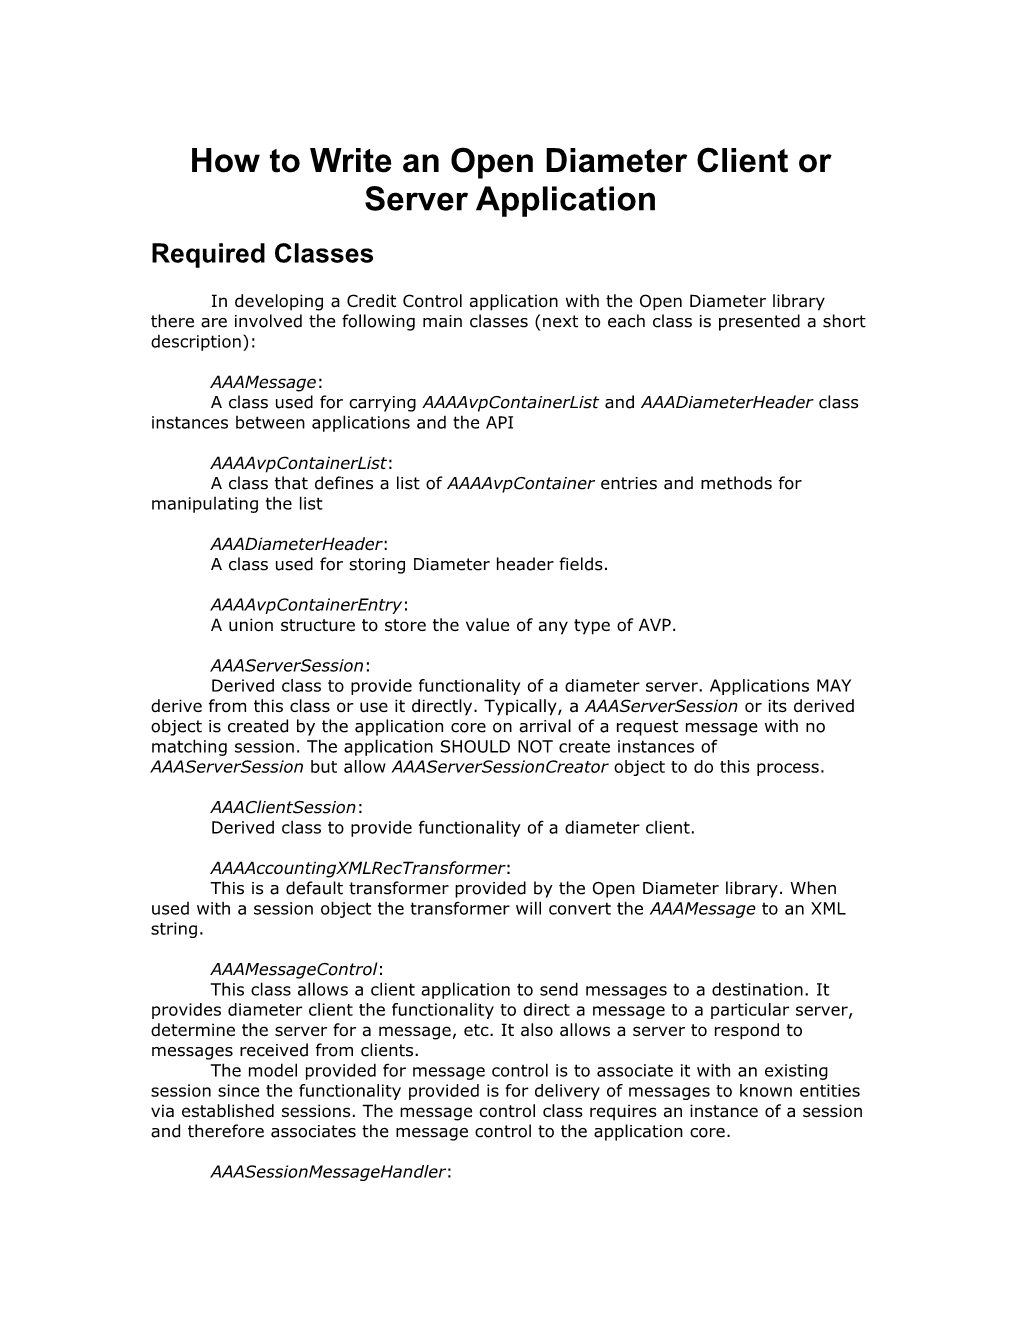 How to Write an Open Diameter Client Or Server Application